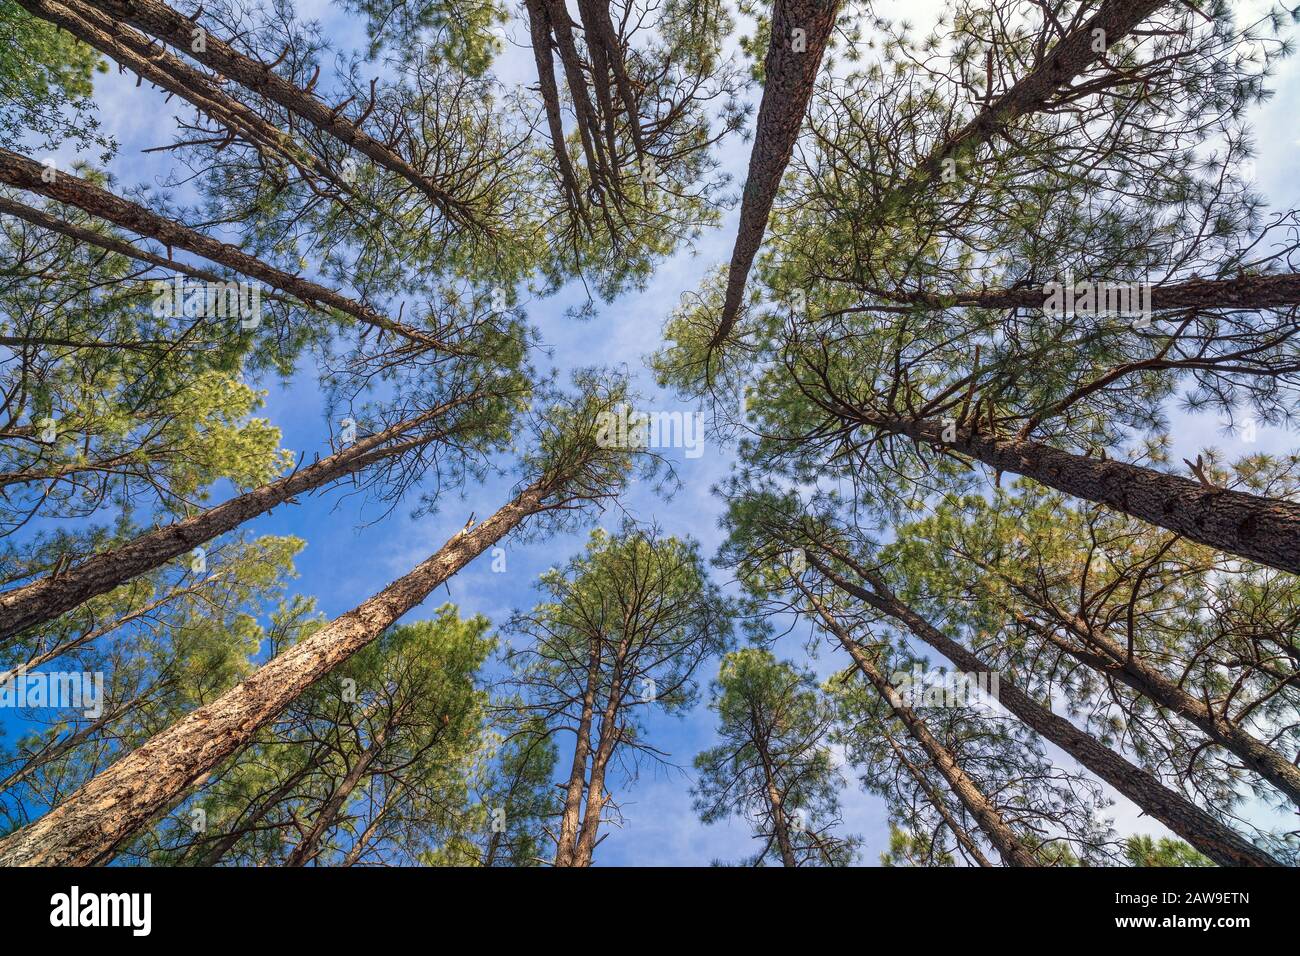 Looking up through pine trees in a forest in Payson, Arizona Stock Photo